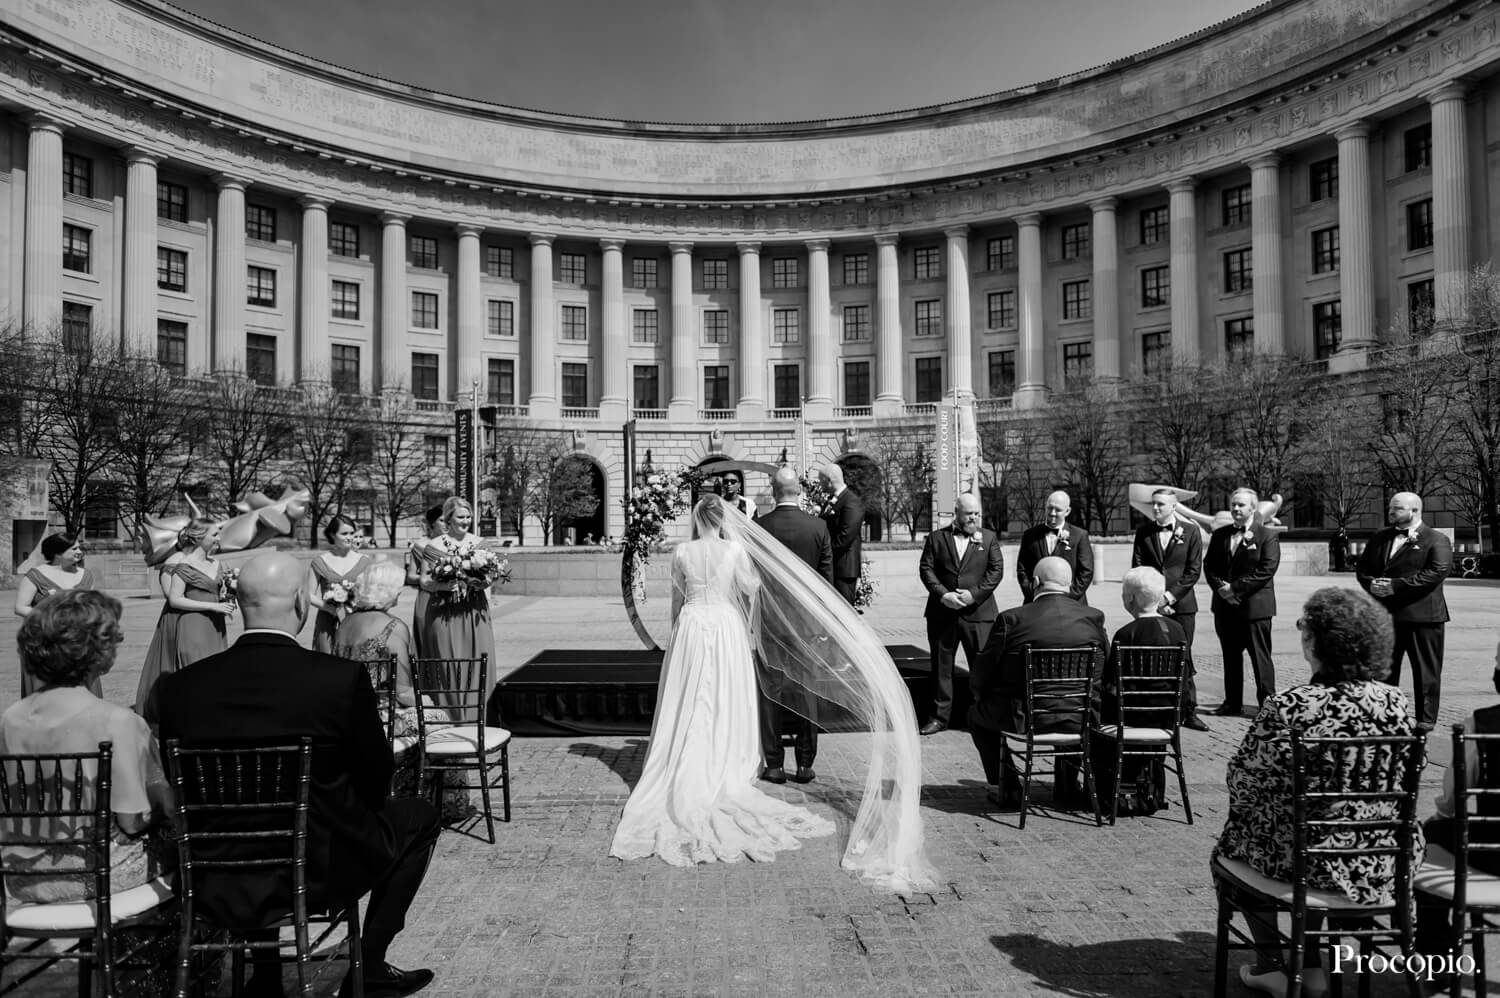 Ceremony in black and white - Michelle Whyte - best Washington DC wedding planner - photo by Procopio Photography